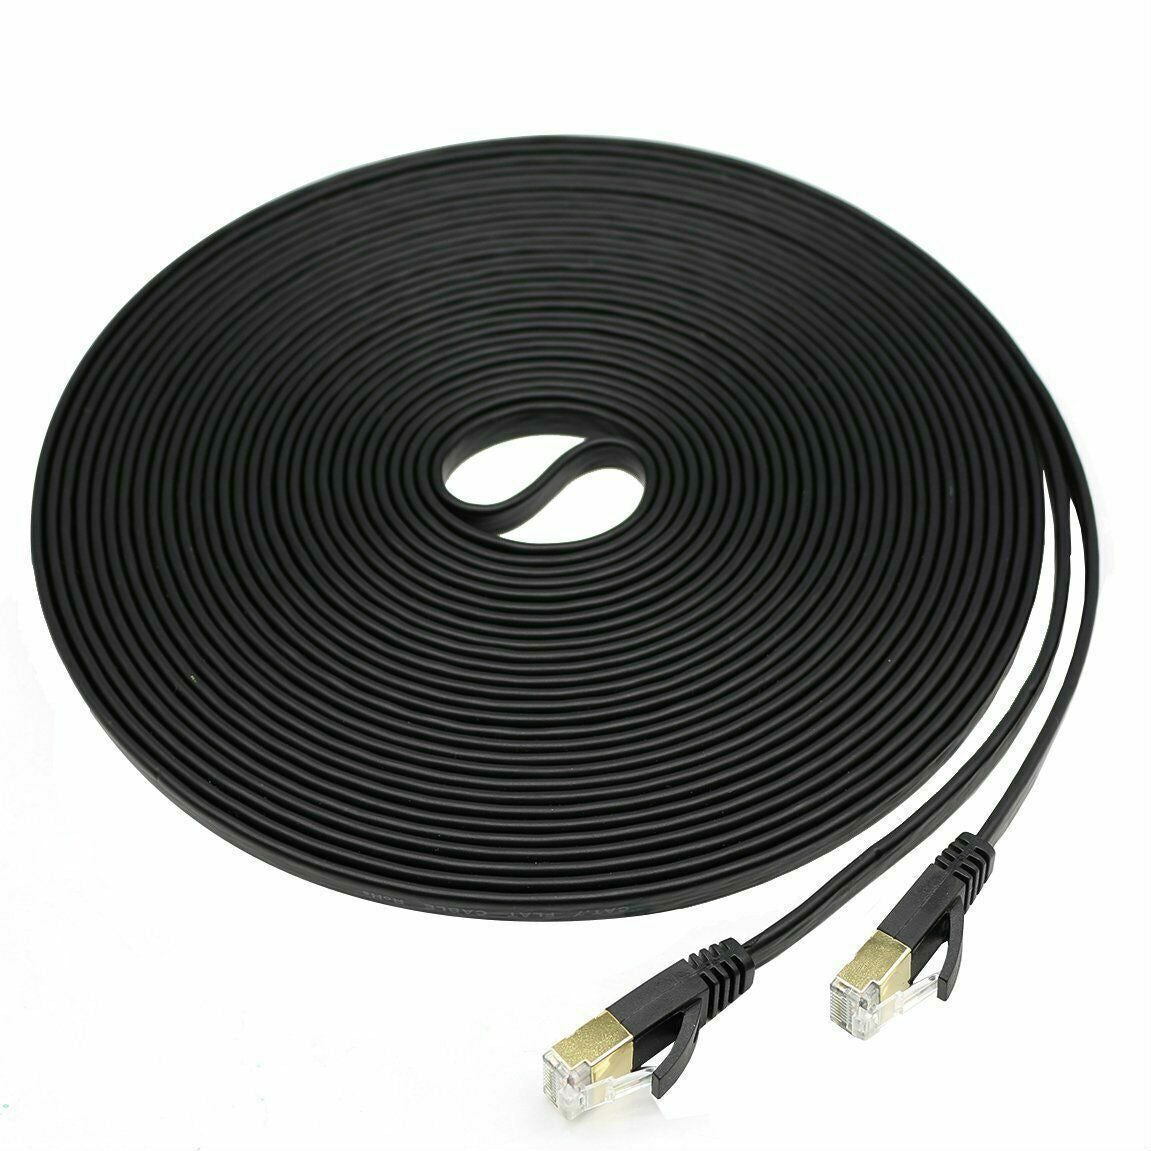 50FT CAT7 CAT 7 Flat Ethernet Cable LAN RJ45 Internet Router Patch Cord 50 Feet